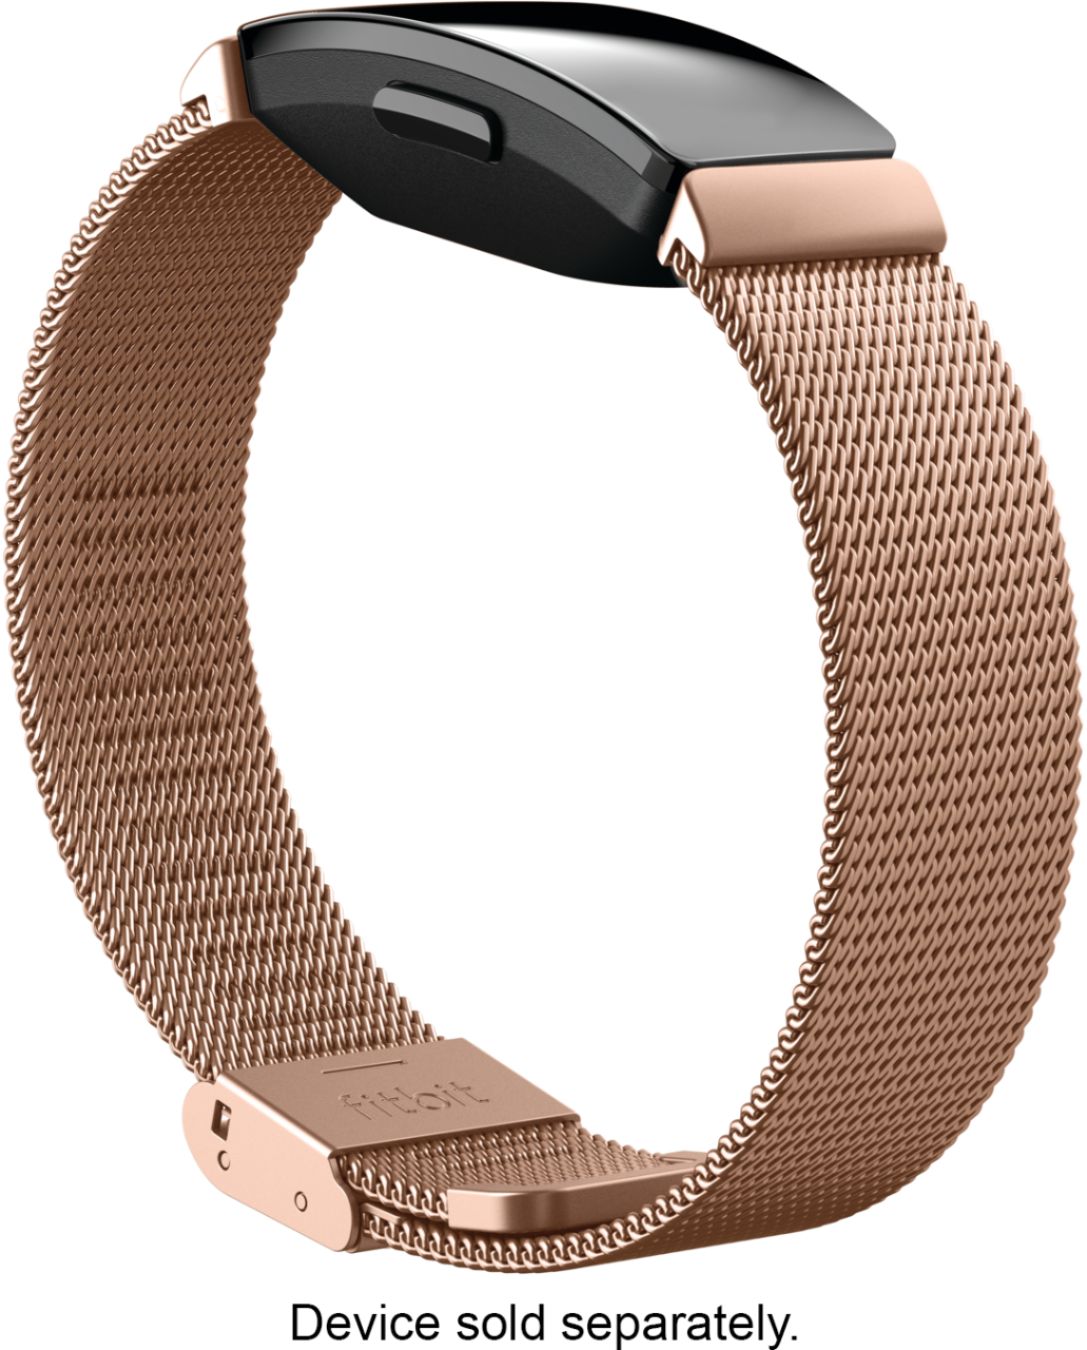 gold strap fitbit